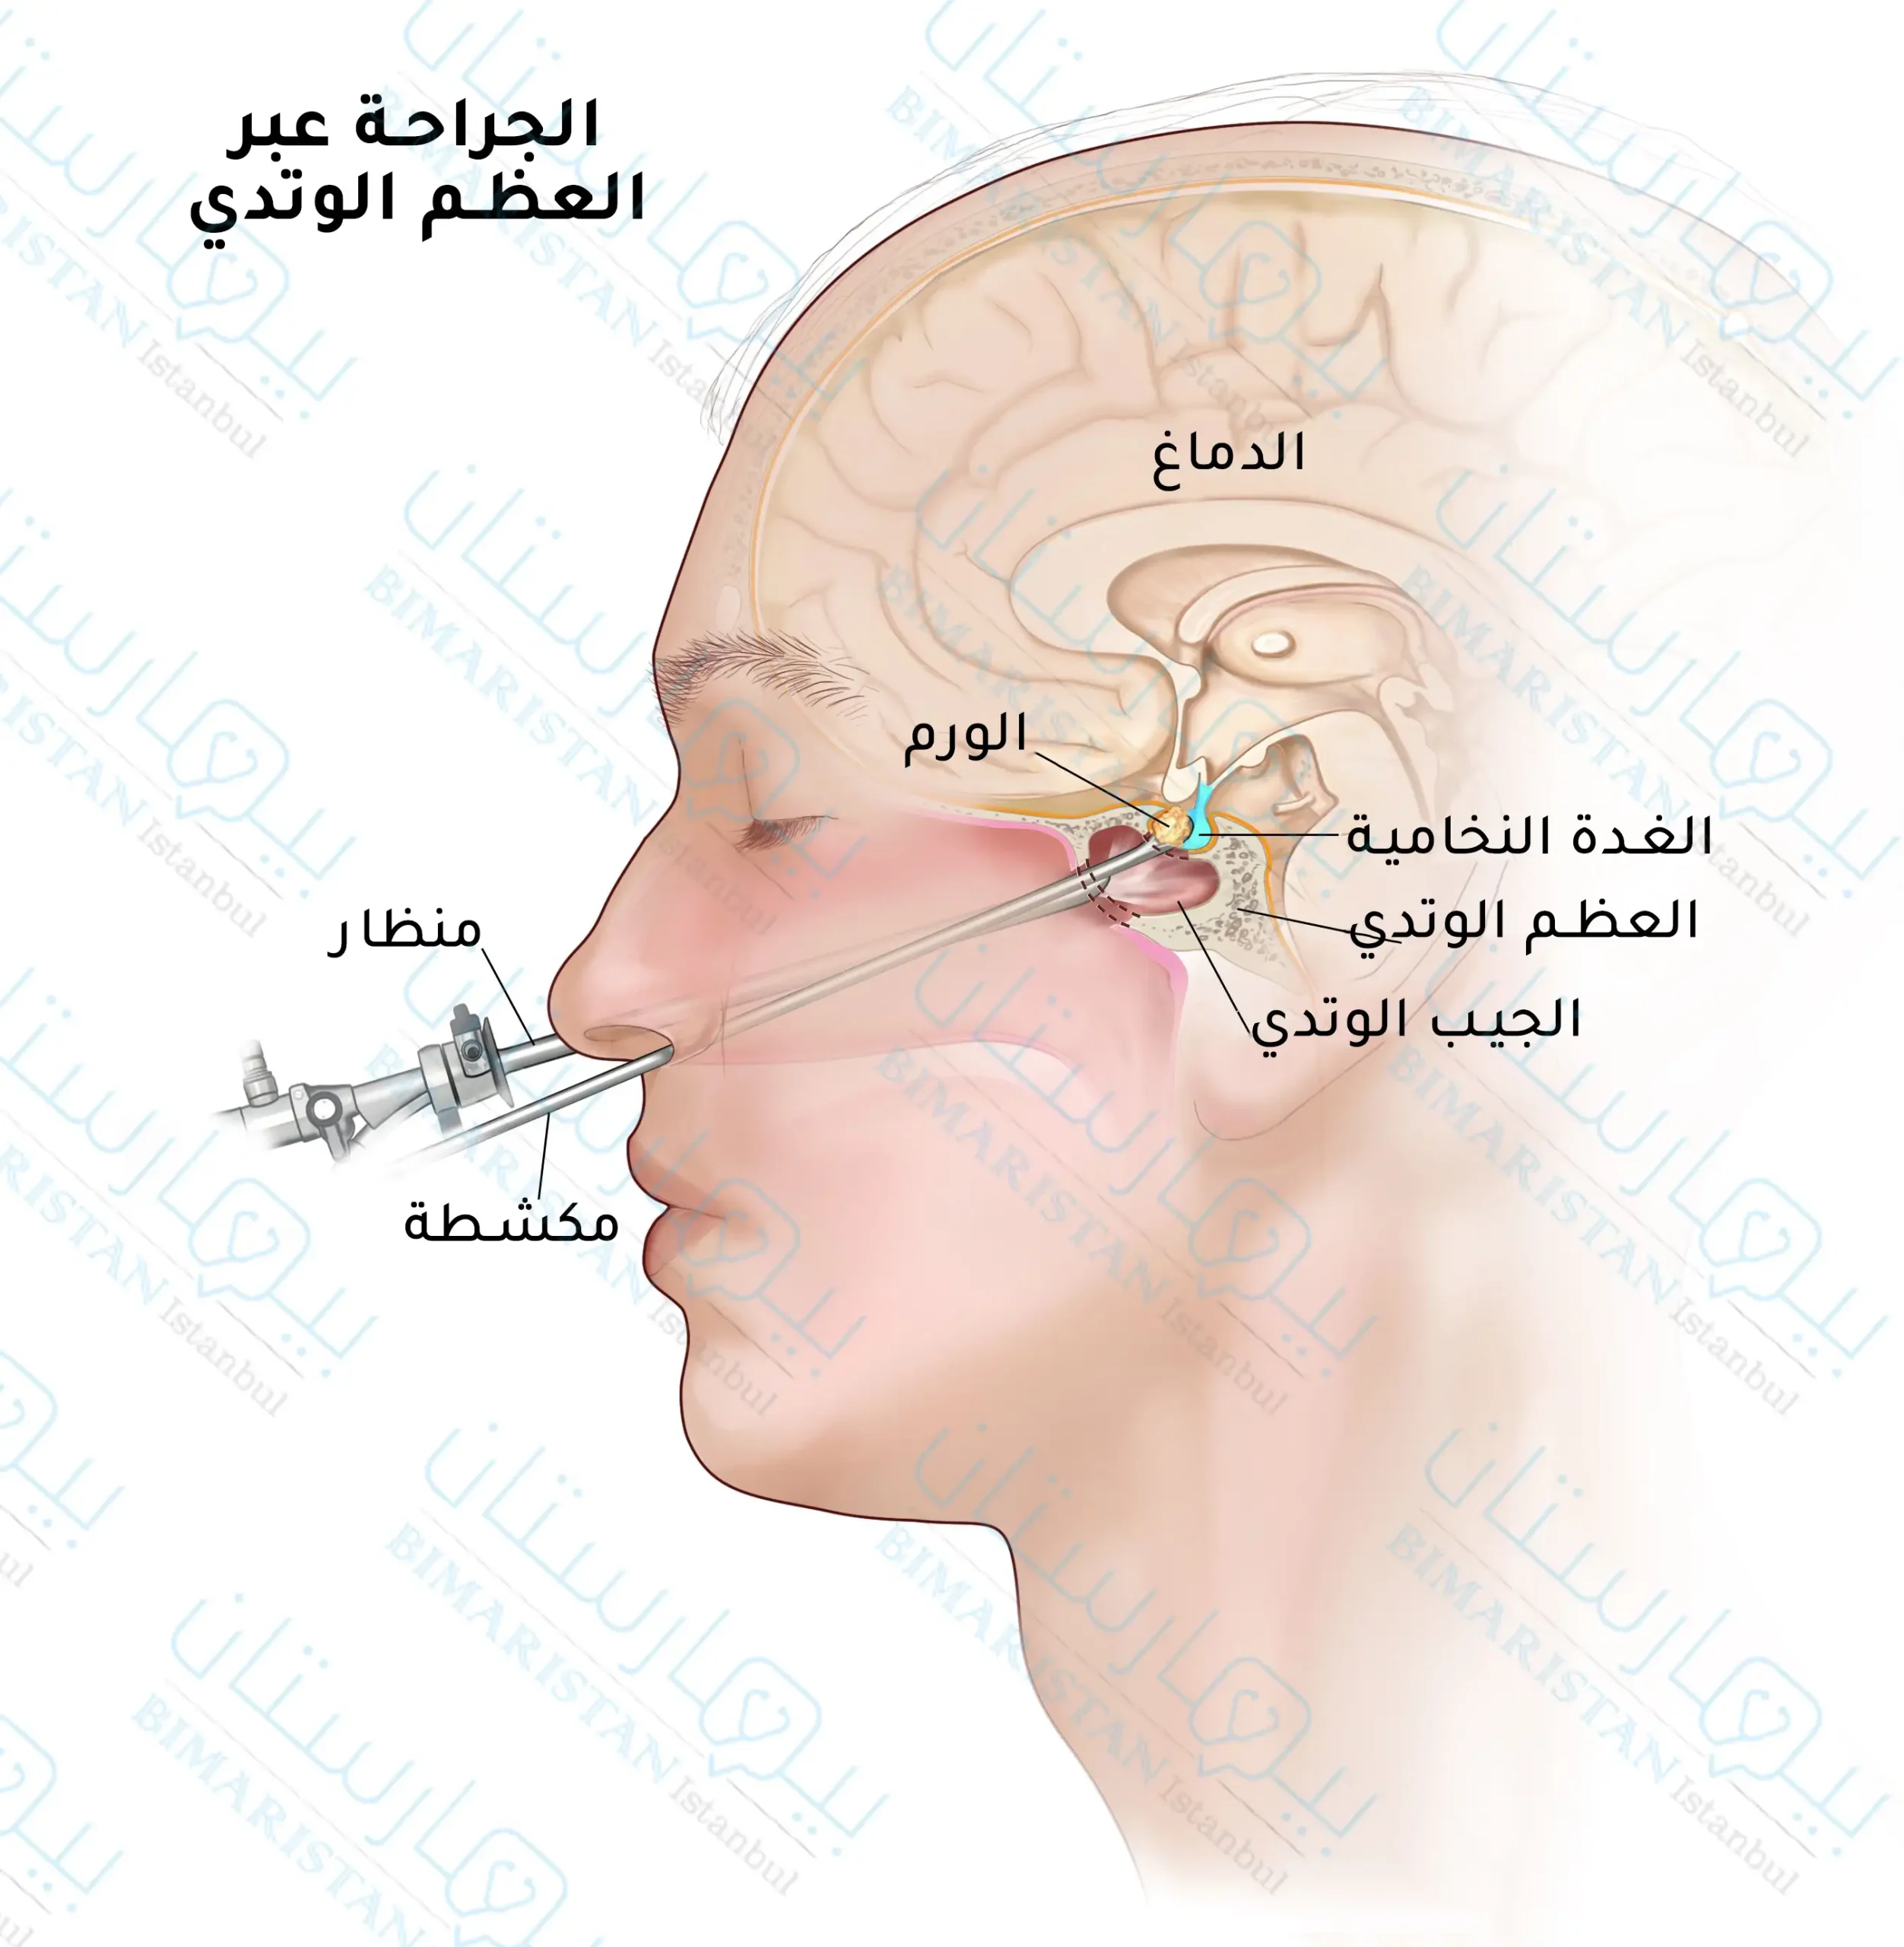 Treatment of pituitary tumor by surgery through the sphenoid bone